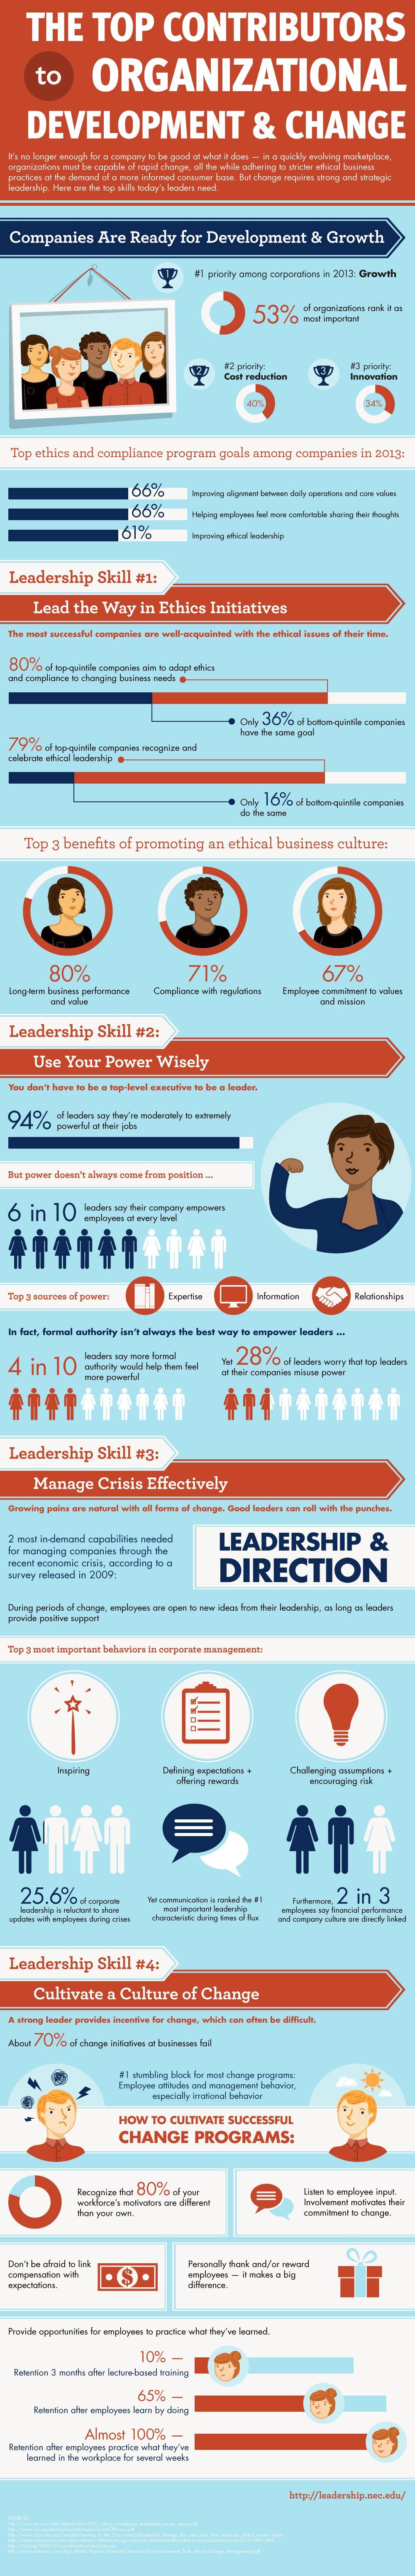 Are You a Good Leader? (Infographic)